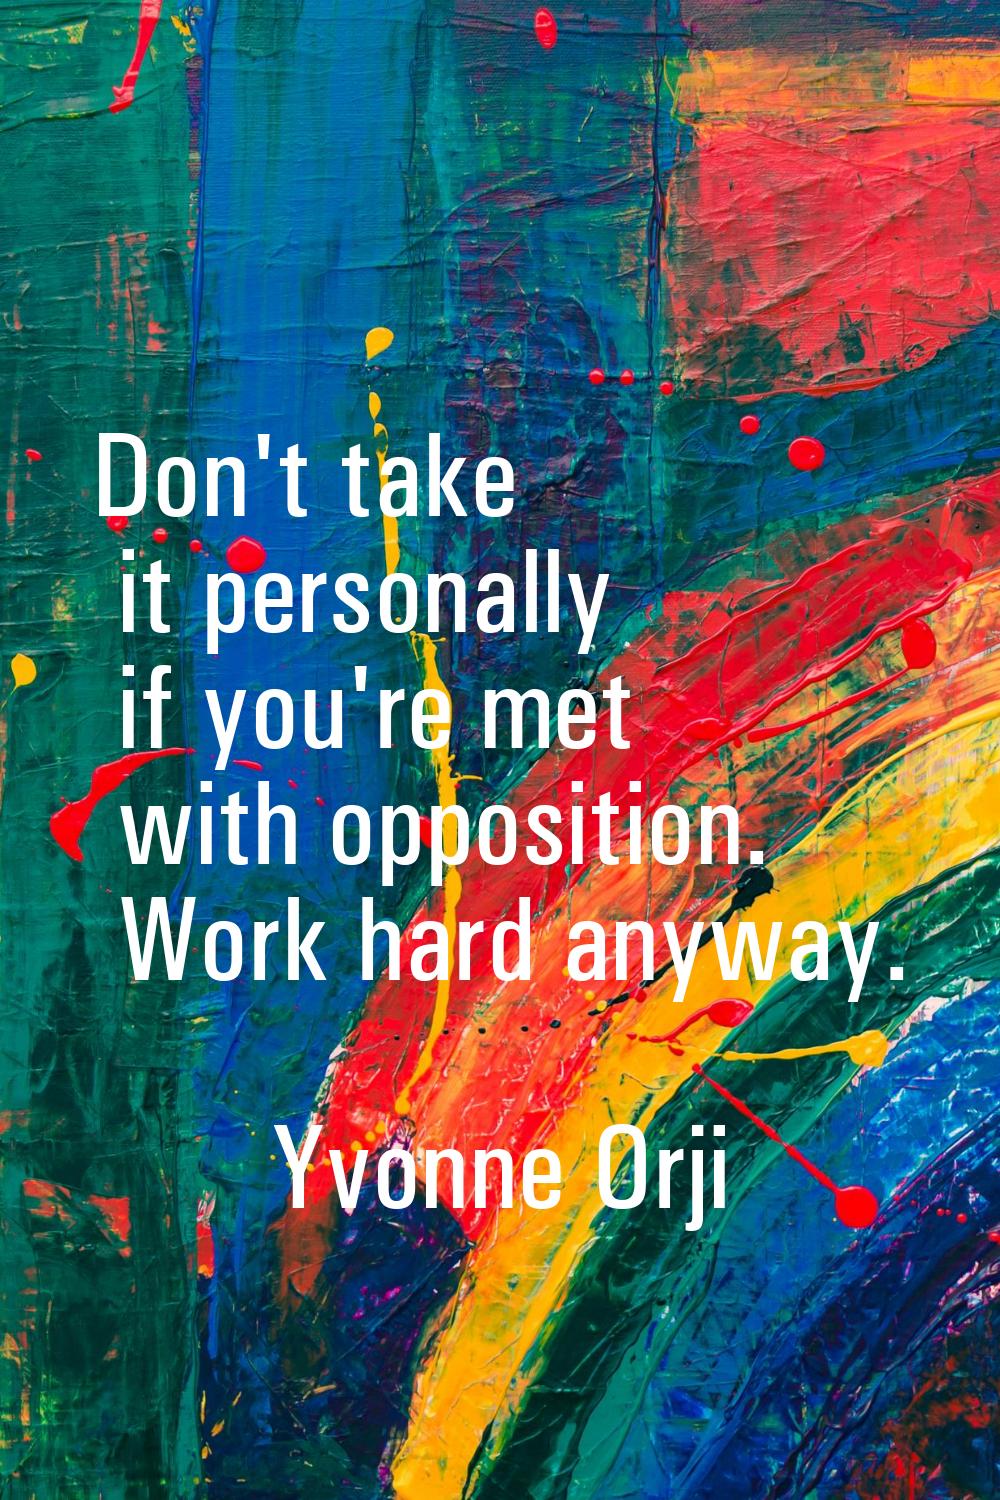 Don't take it personally if you're met with opposition. Work hard anyway.